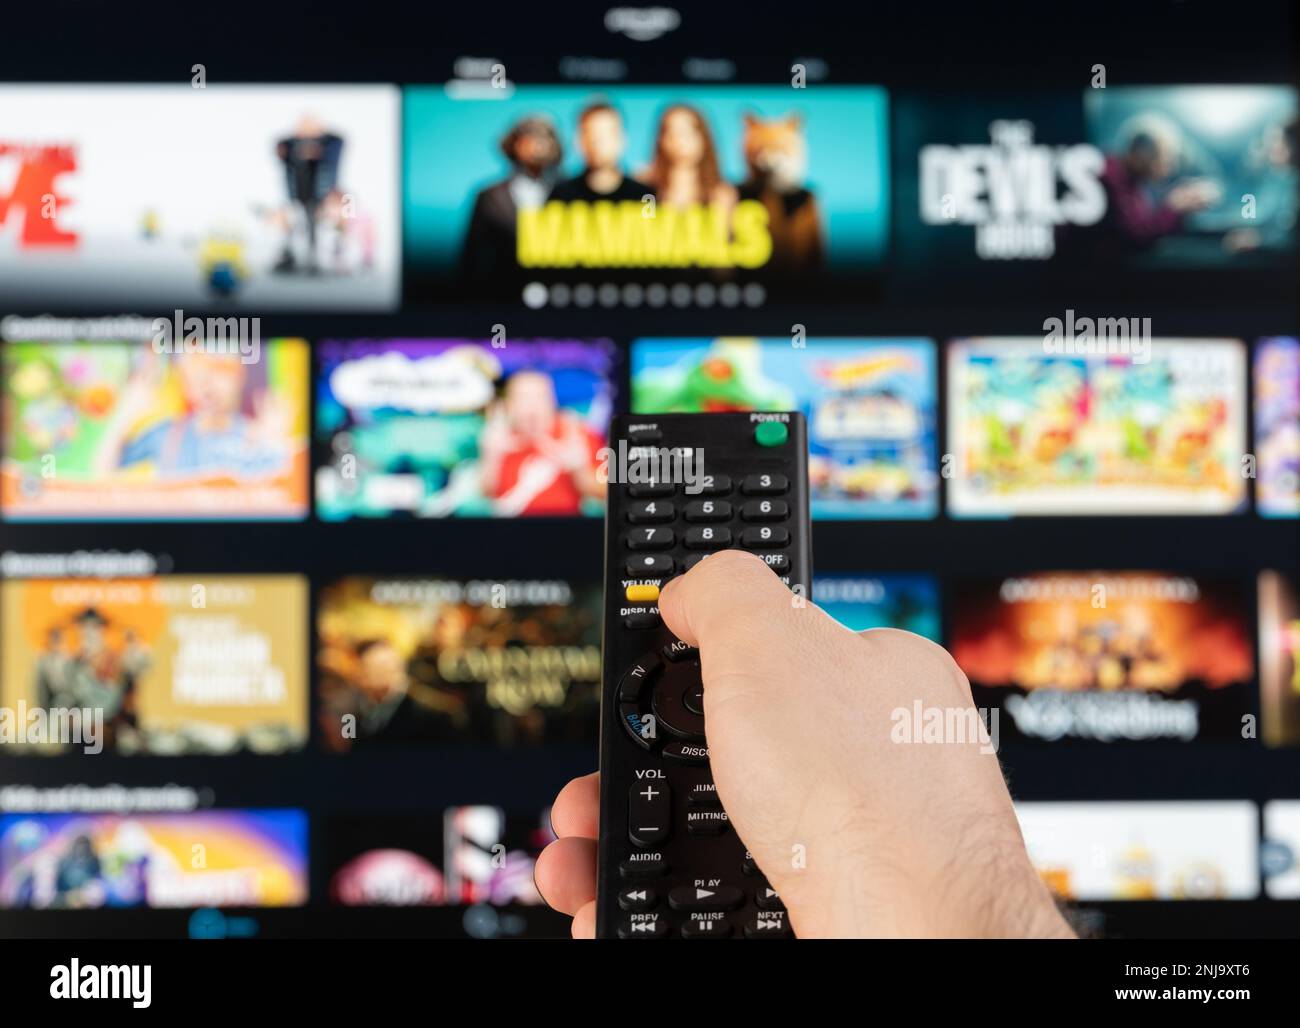 New york, USA - February 21, 2023: Select video on Amazon prime platform stream service on tv with remote control in hand Stock Photo